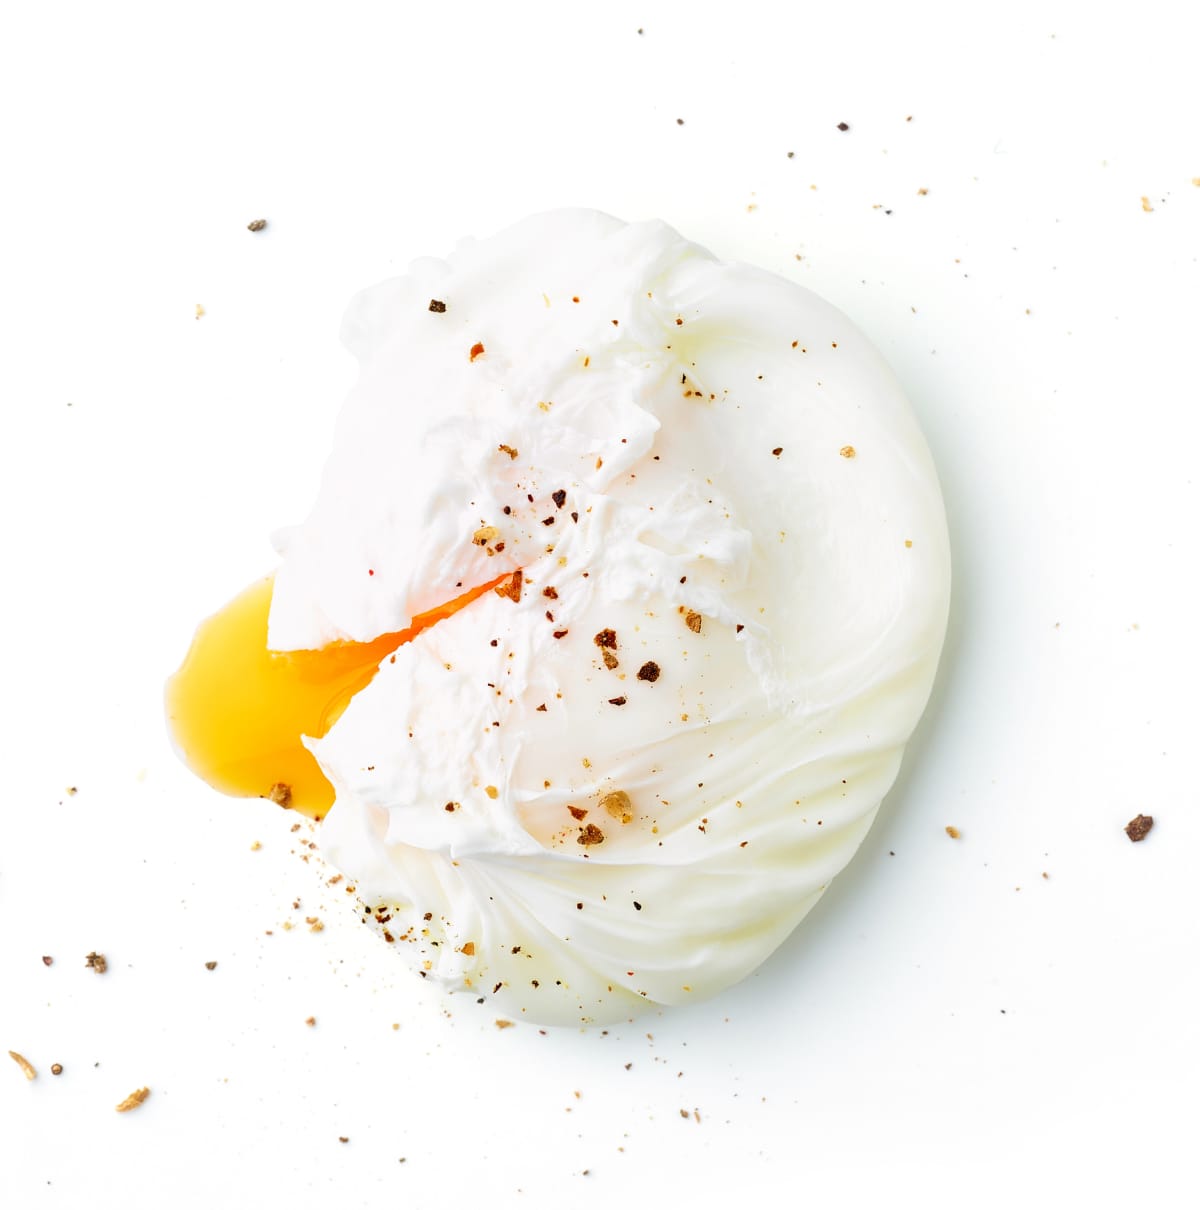 A poached egg with black pepper flakes